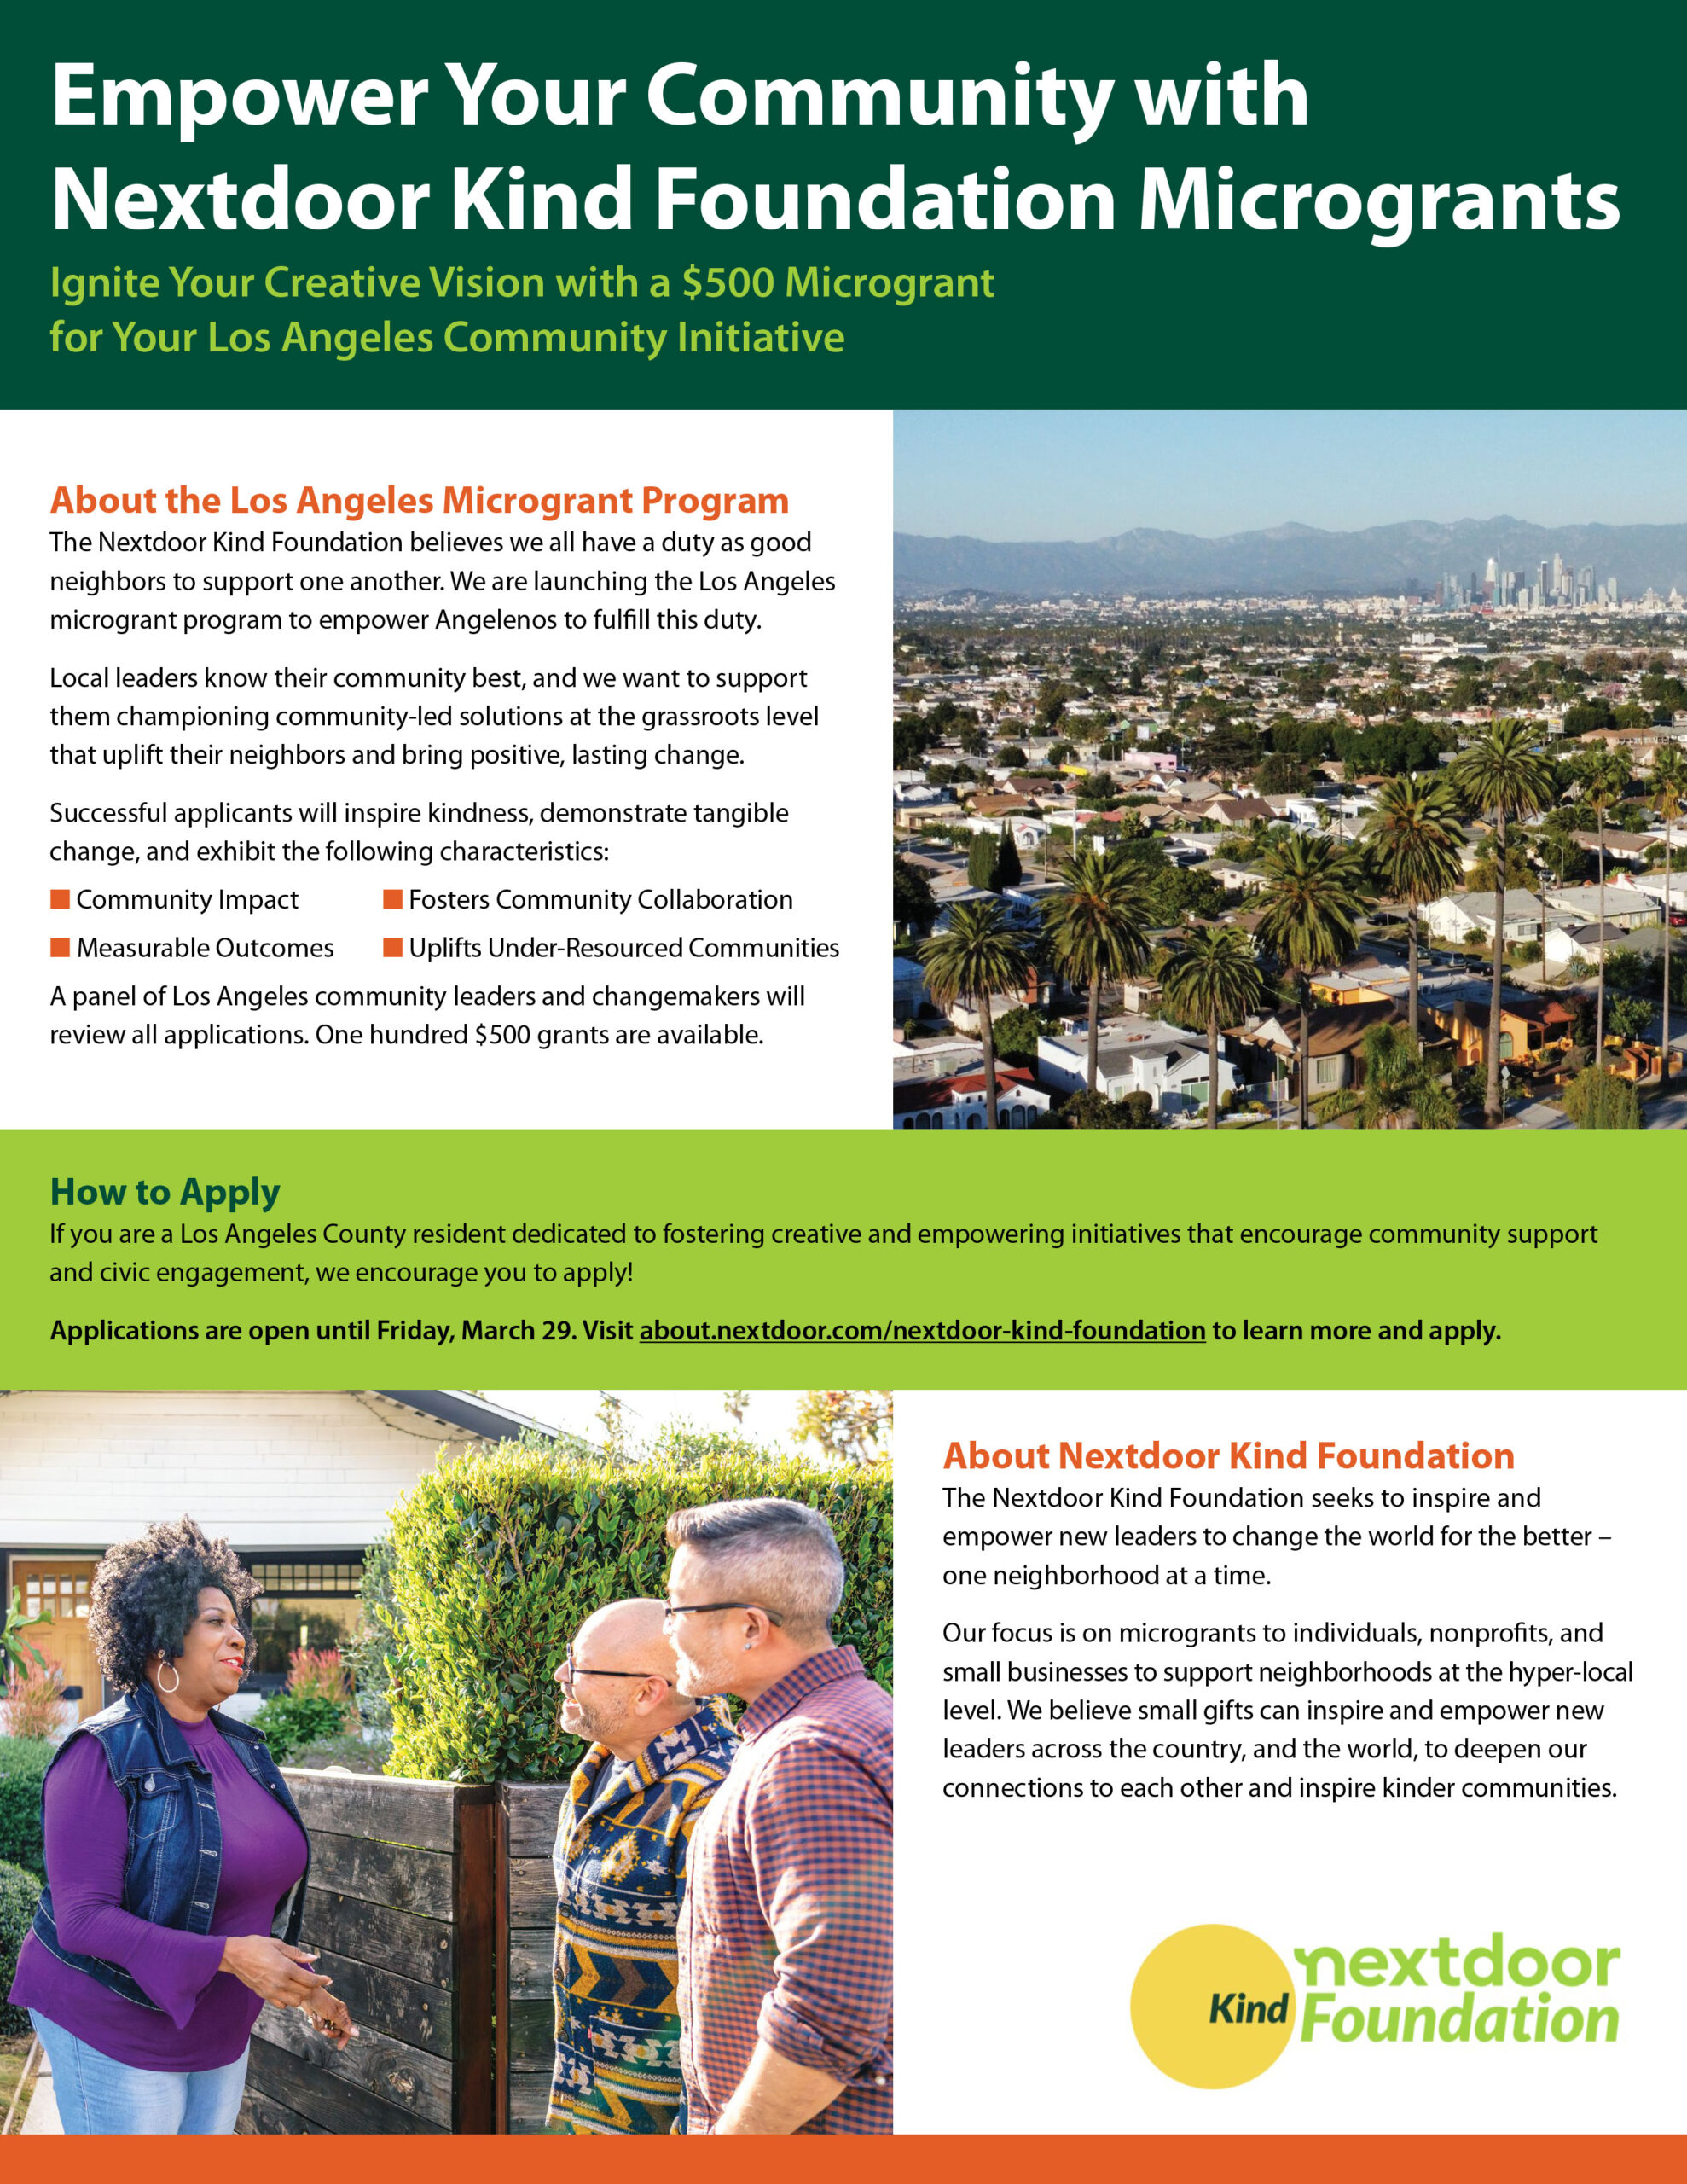 Empower Your Community micro grant information from Nextdoor Foundation 